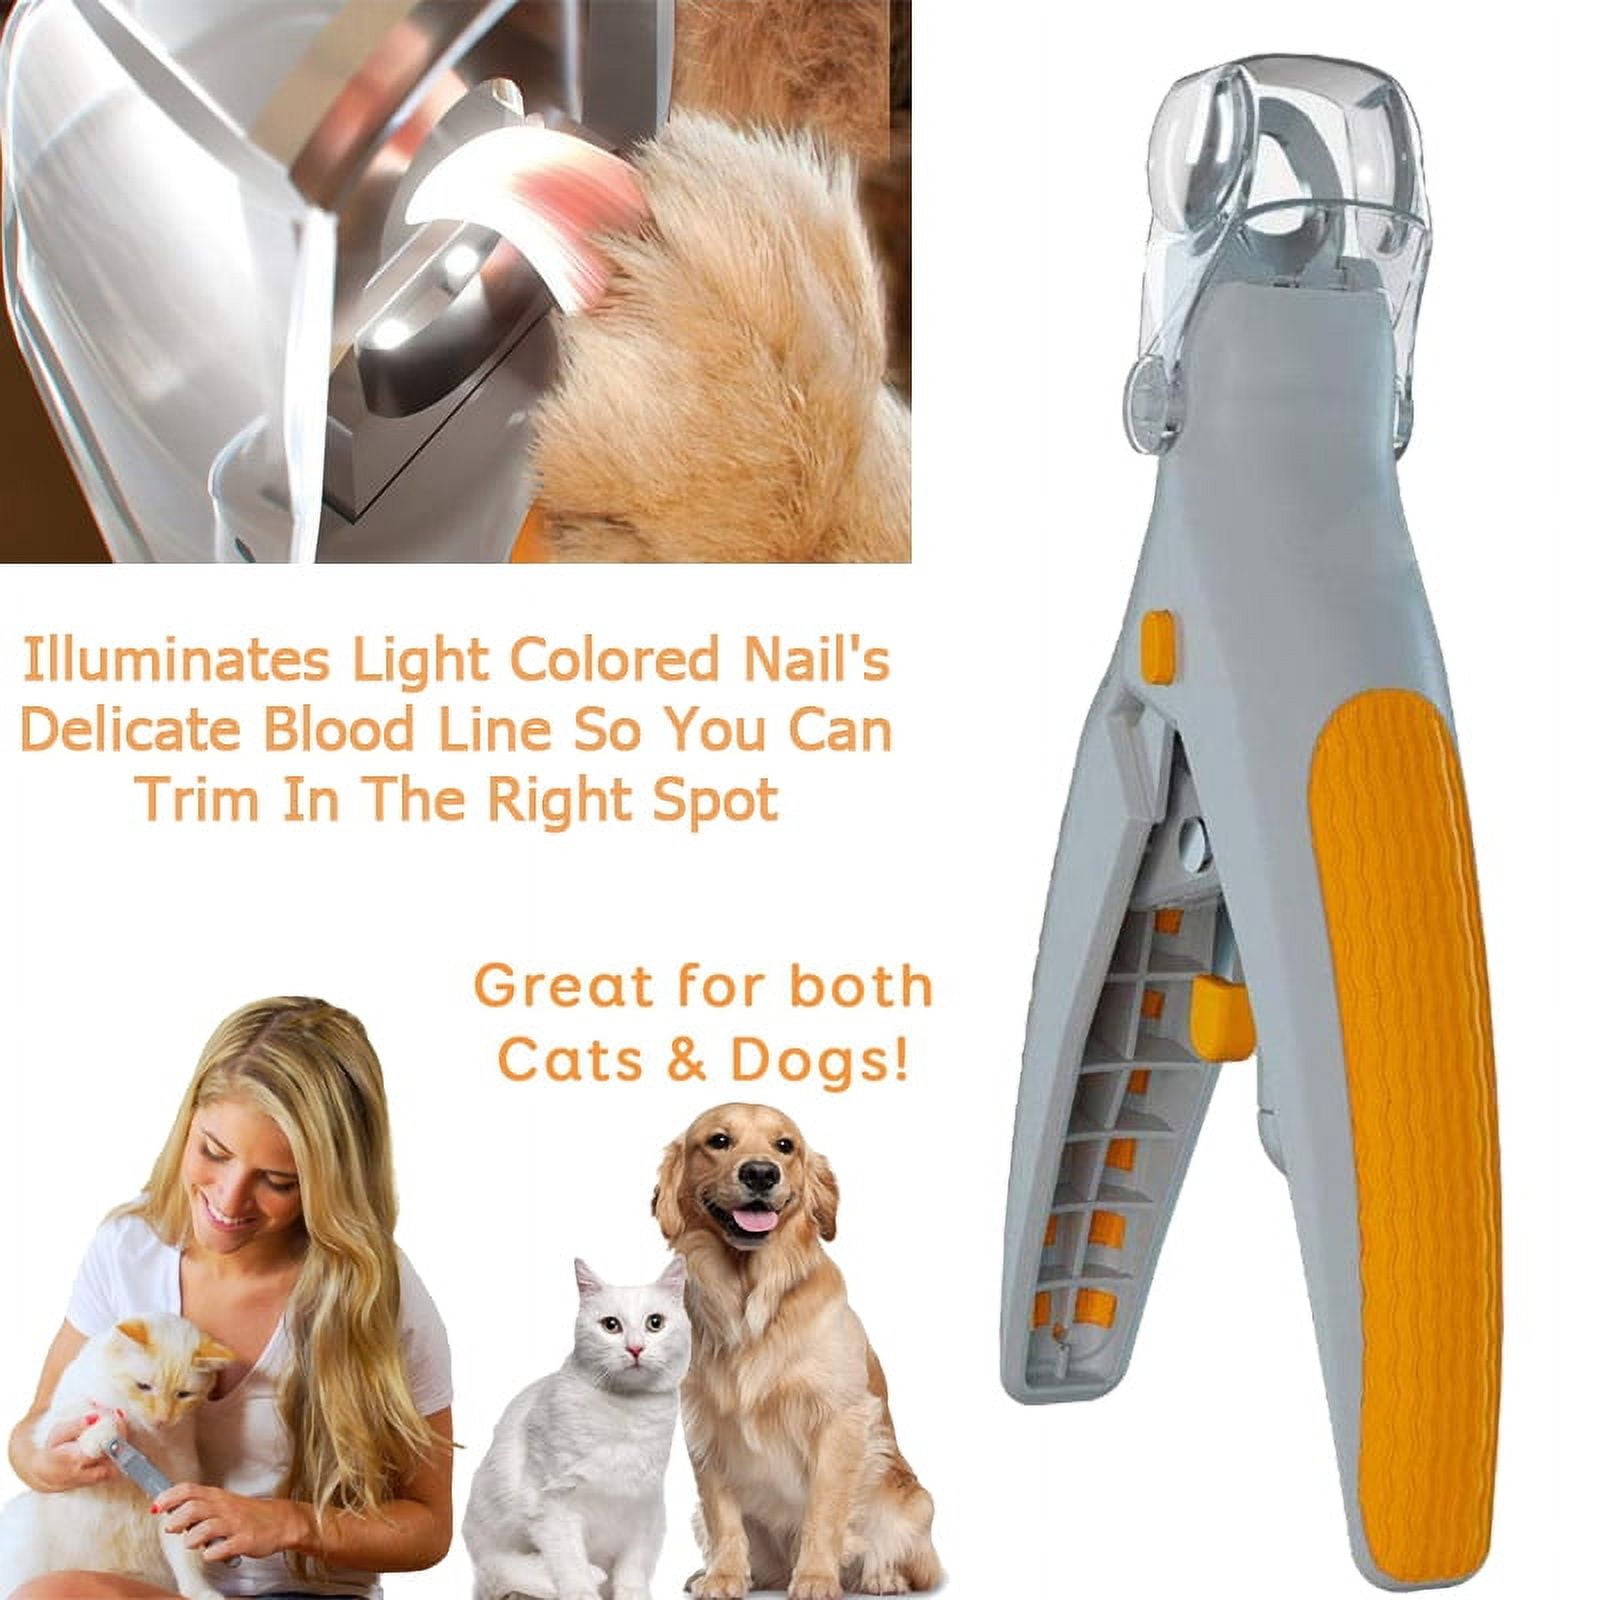 Buy HUFT Nail Cutter for Dogs with Safety Guard Online – Heads Up For Tails